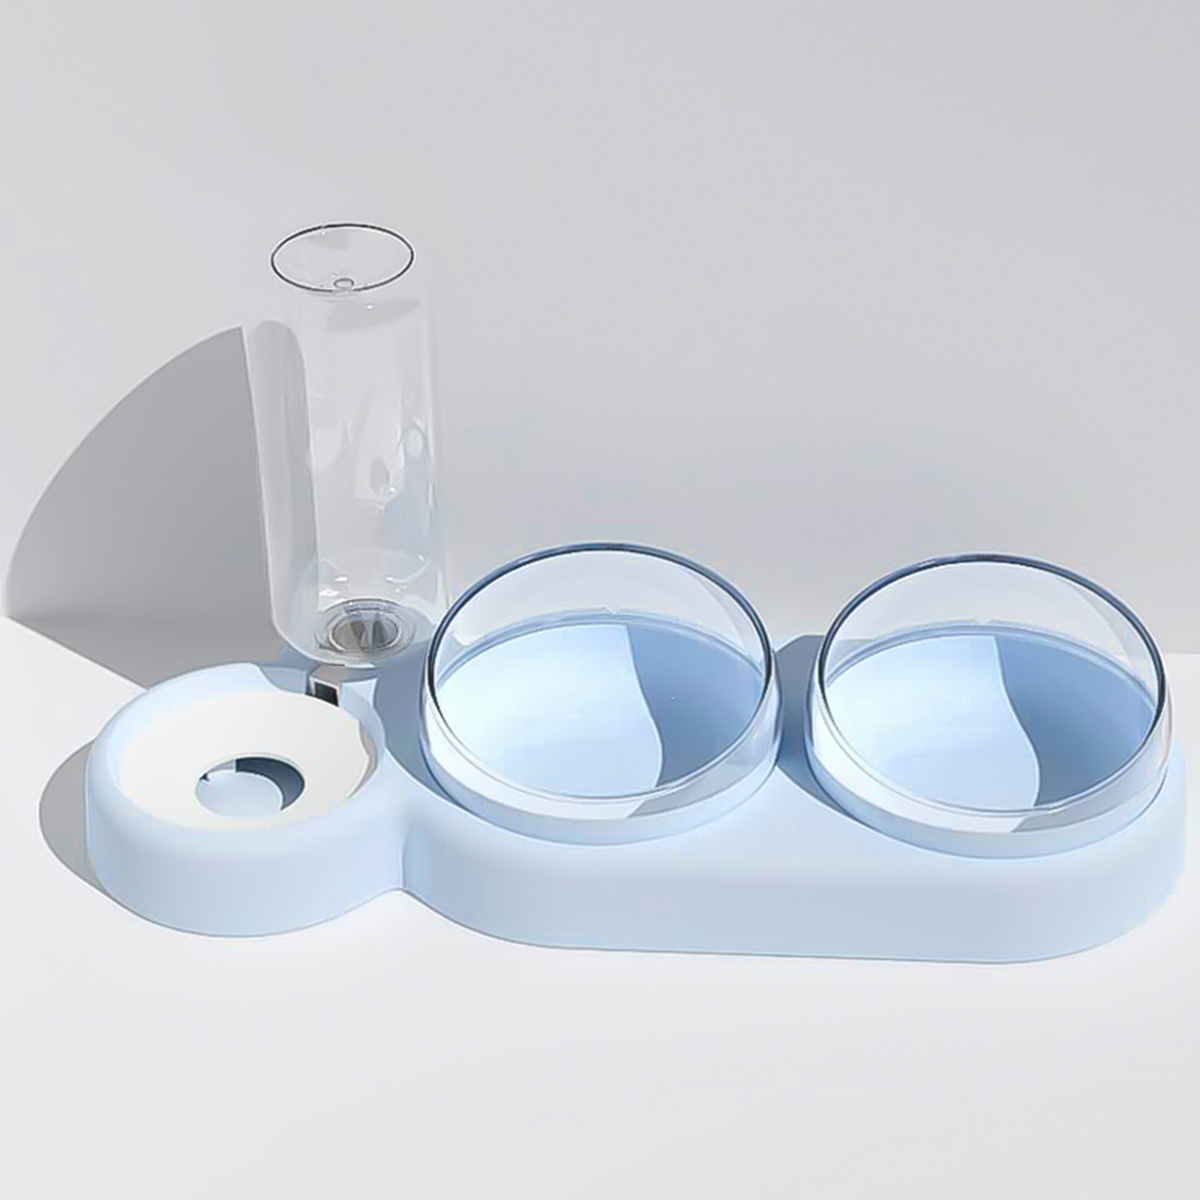 Three-bowl-Design-Pet-Feeder-Dry-and-Wet-Separation-15-Degree-Tilt-Automatic-Anti-wetting-Large-Capa-1852271-33